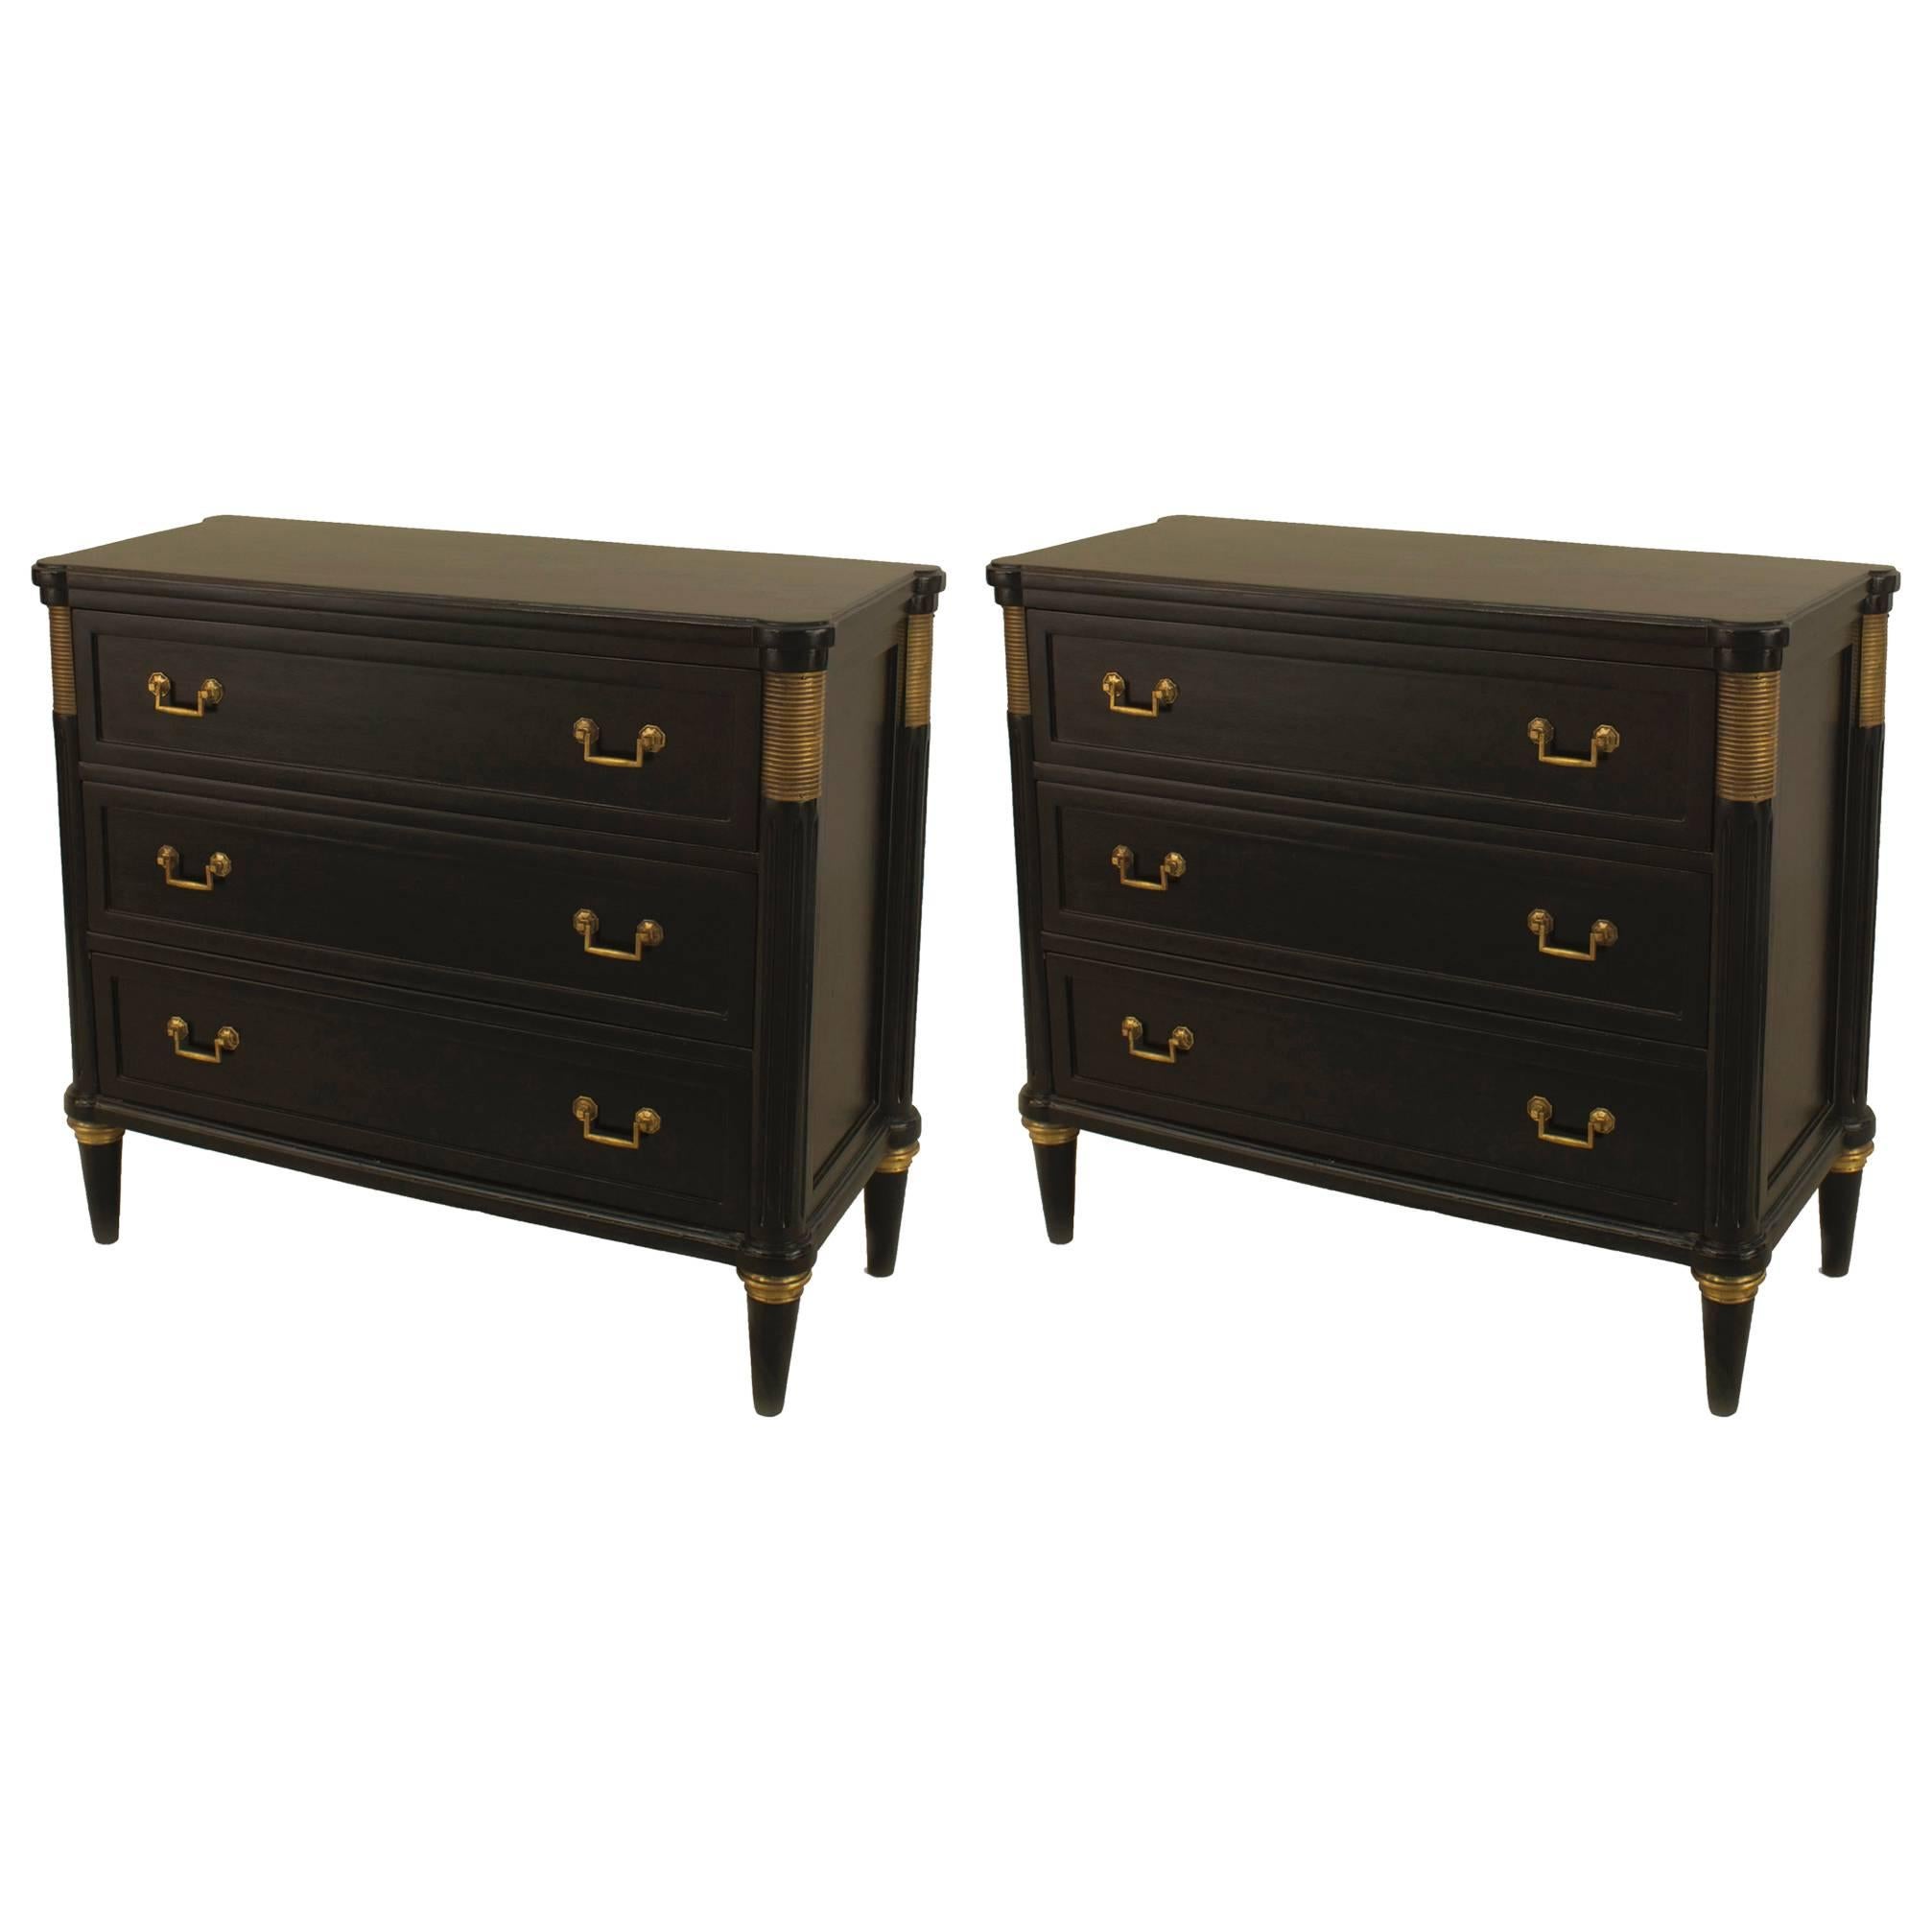 Pair of 1940s French Bronze-Trimmed Ebonized Chests Attributed to Jansen